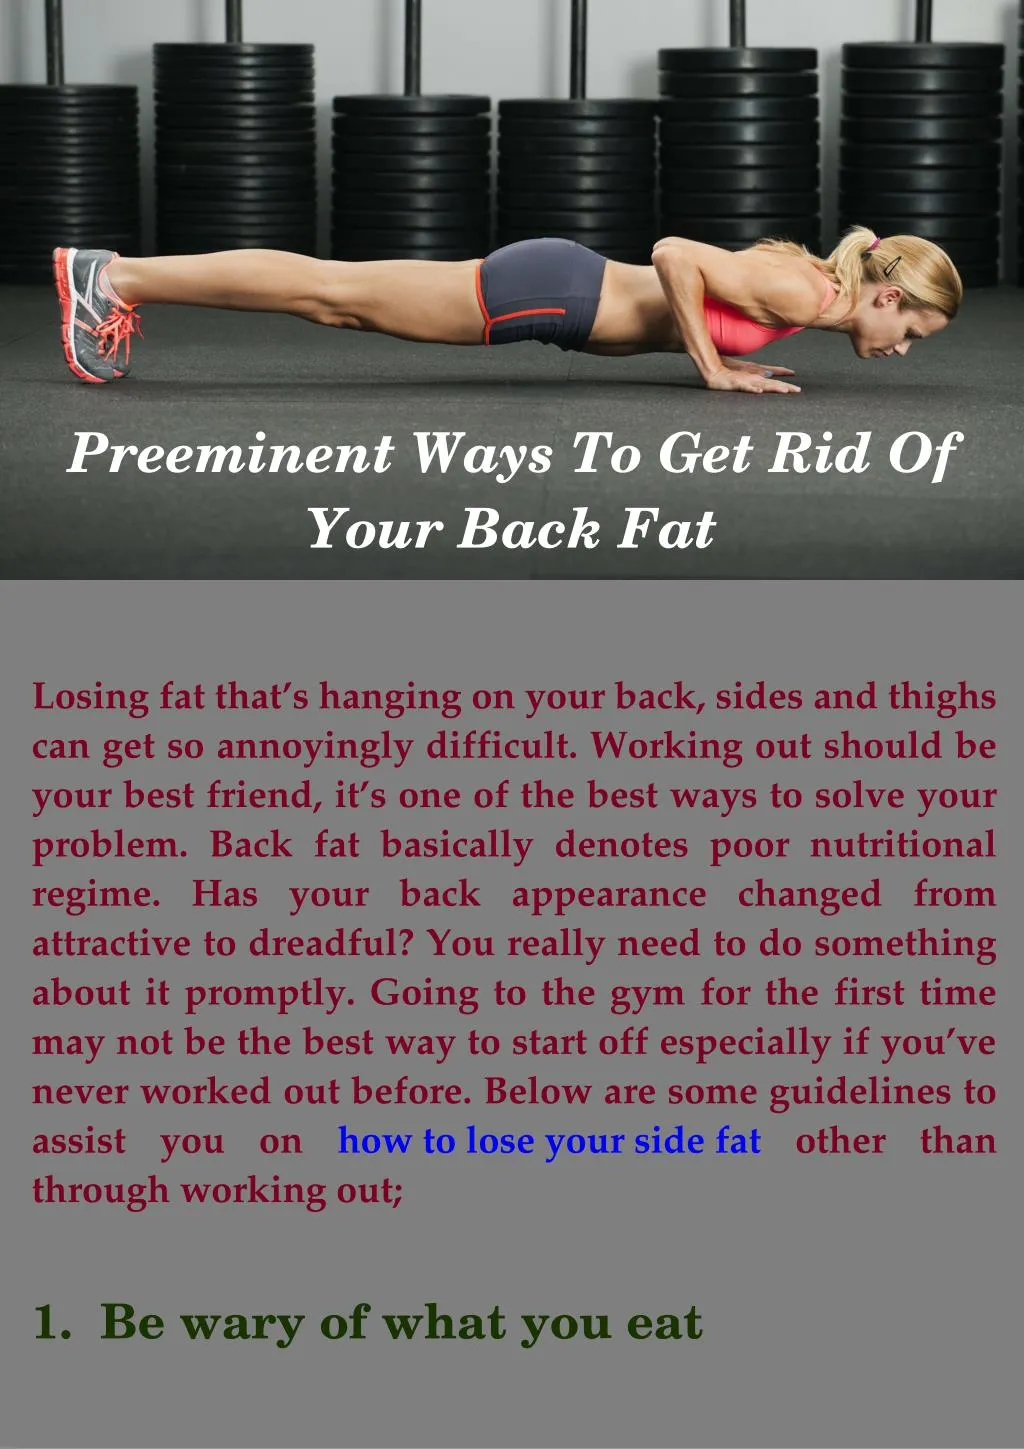 preeminent ways to get rid of your back fat